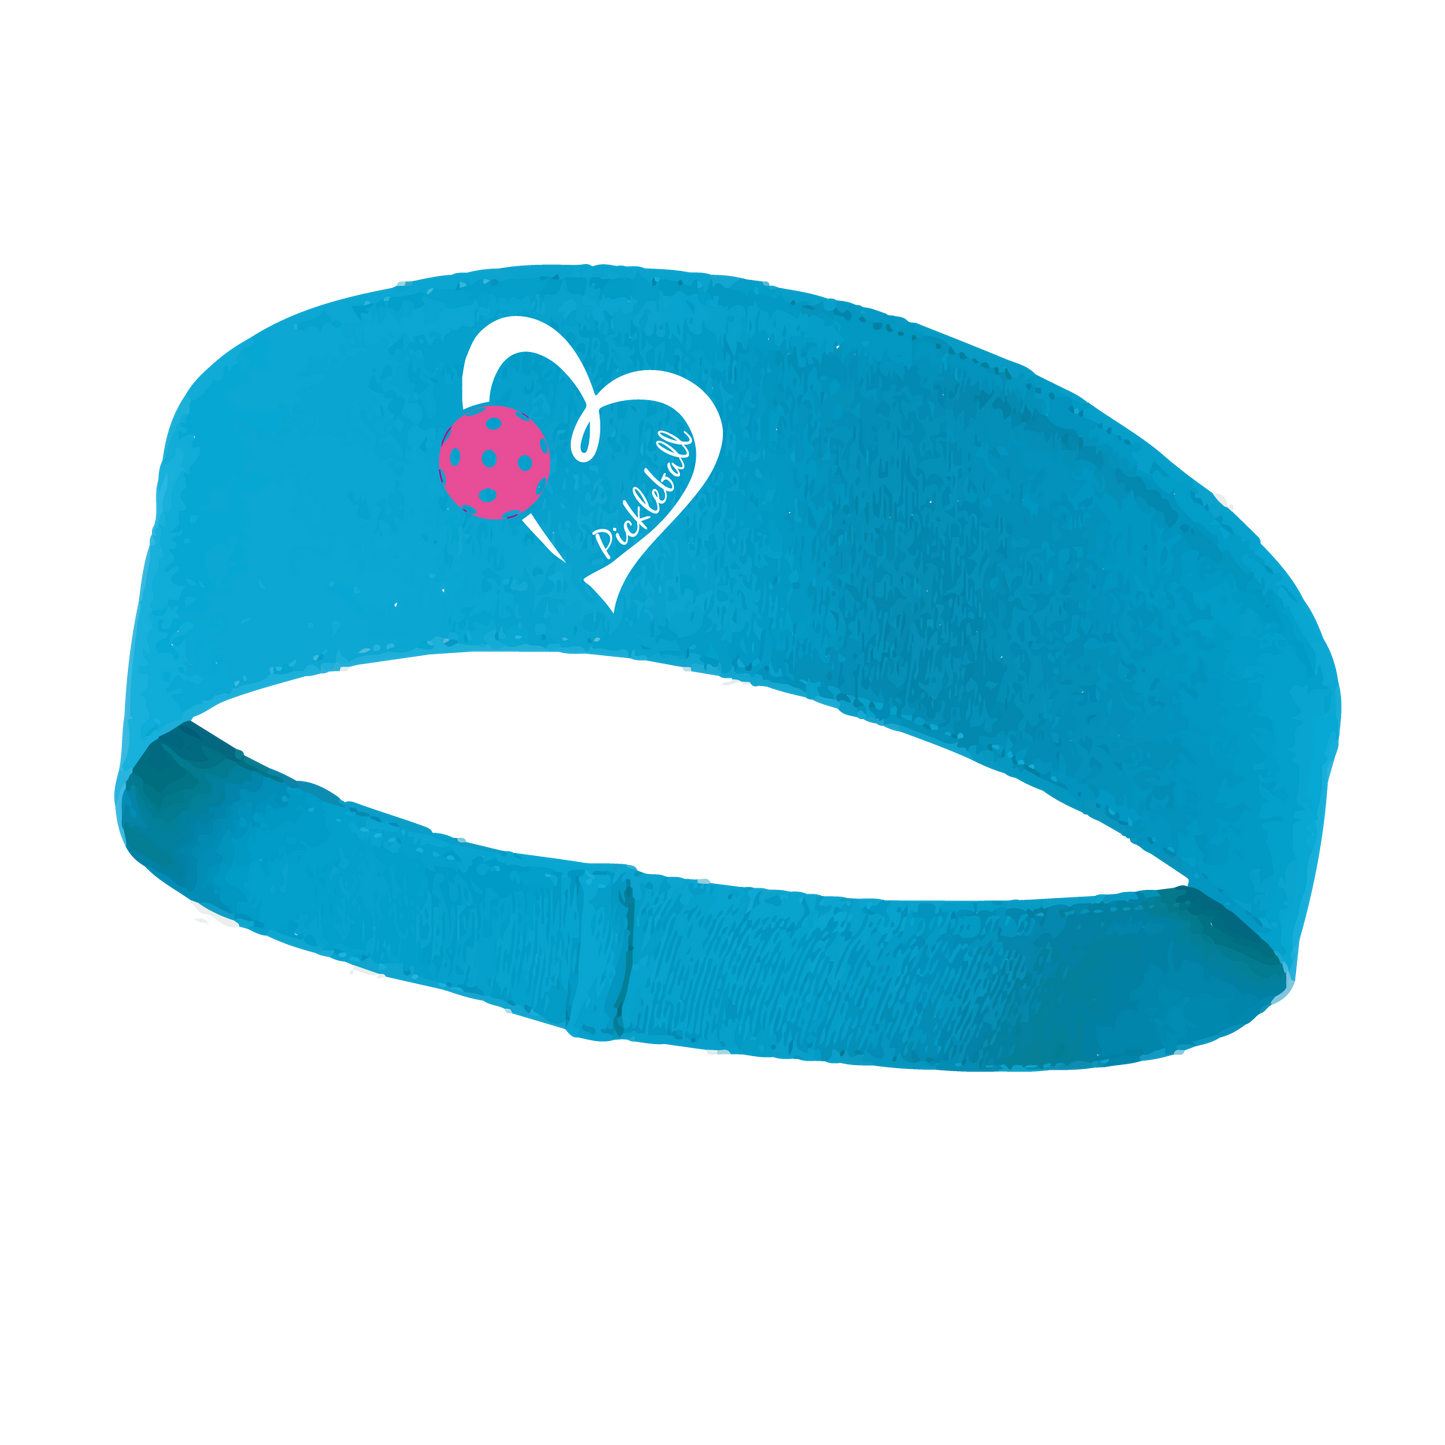 Pickleball Headband Design: Pickleball Love Heart and Ball - Design is White with Pink Ball  This fun, pickleball designed, moisture-wicking headband narrows in the back to fit more securely. Single-needle top-stitched edging. These headbands come in a variety of colors. Truly shows your love for the sport of pickleball!! 